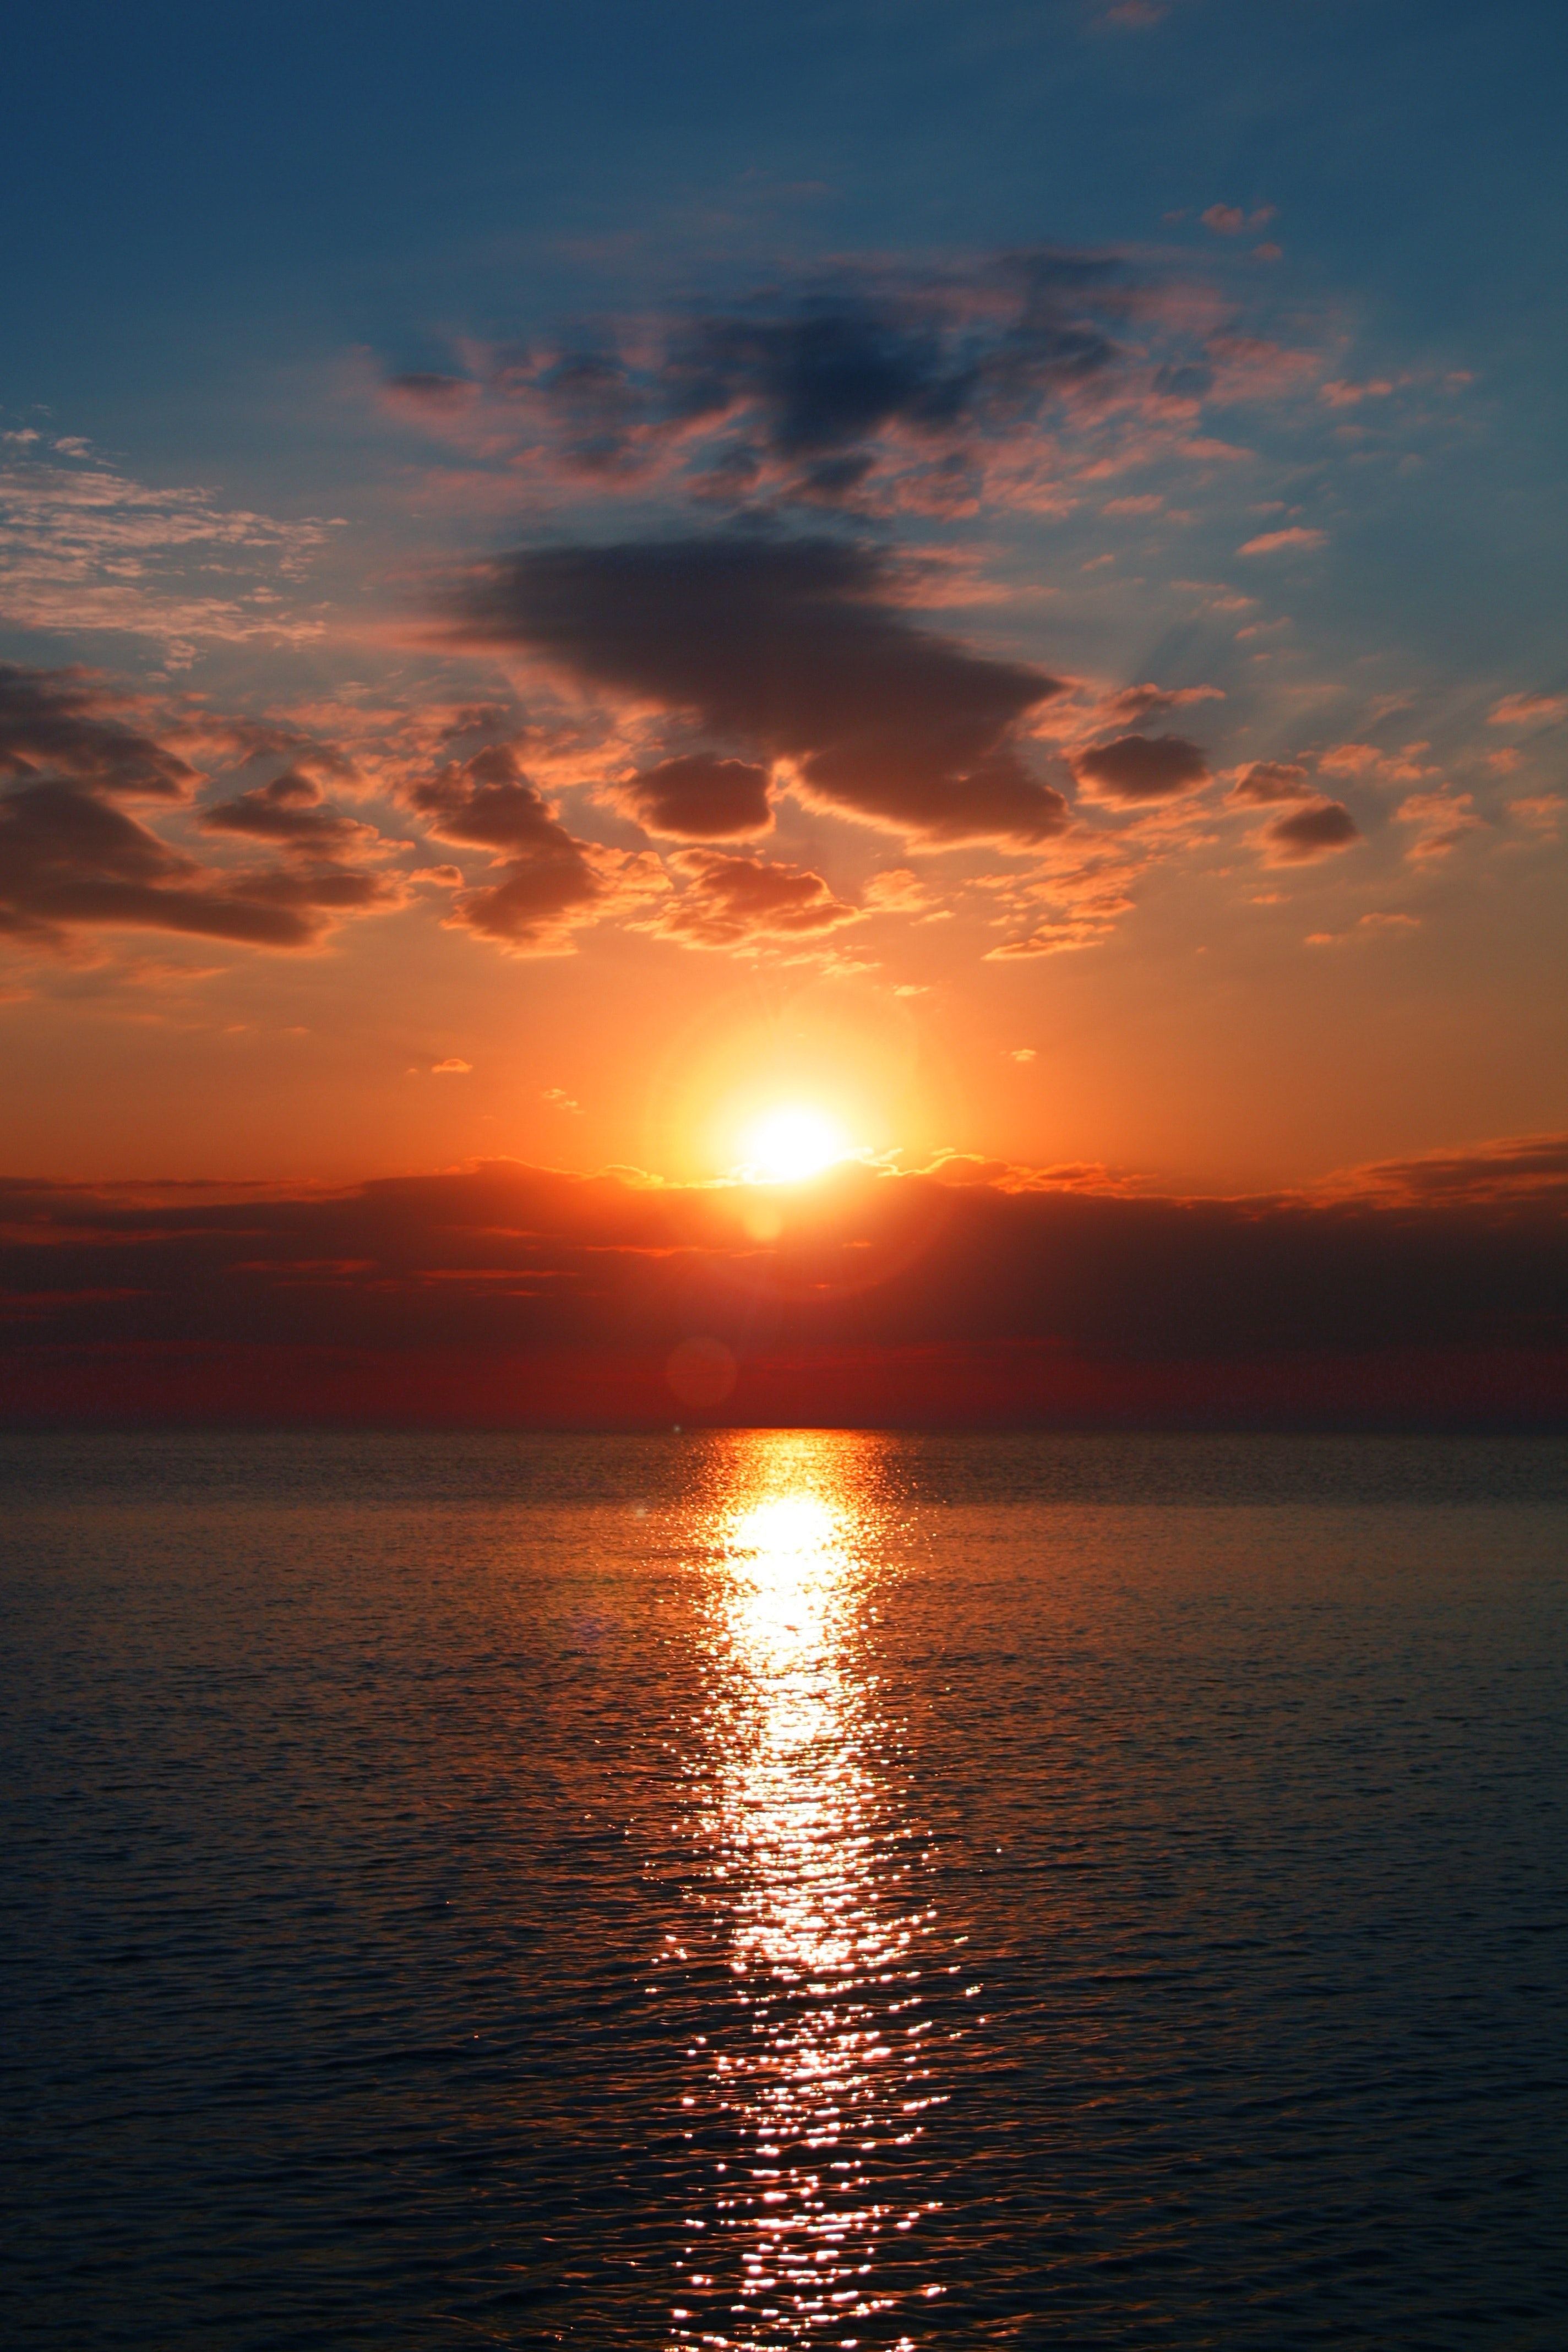 A sunset over the ocean with clouds - Sun